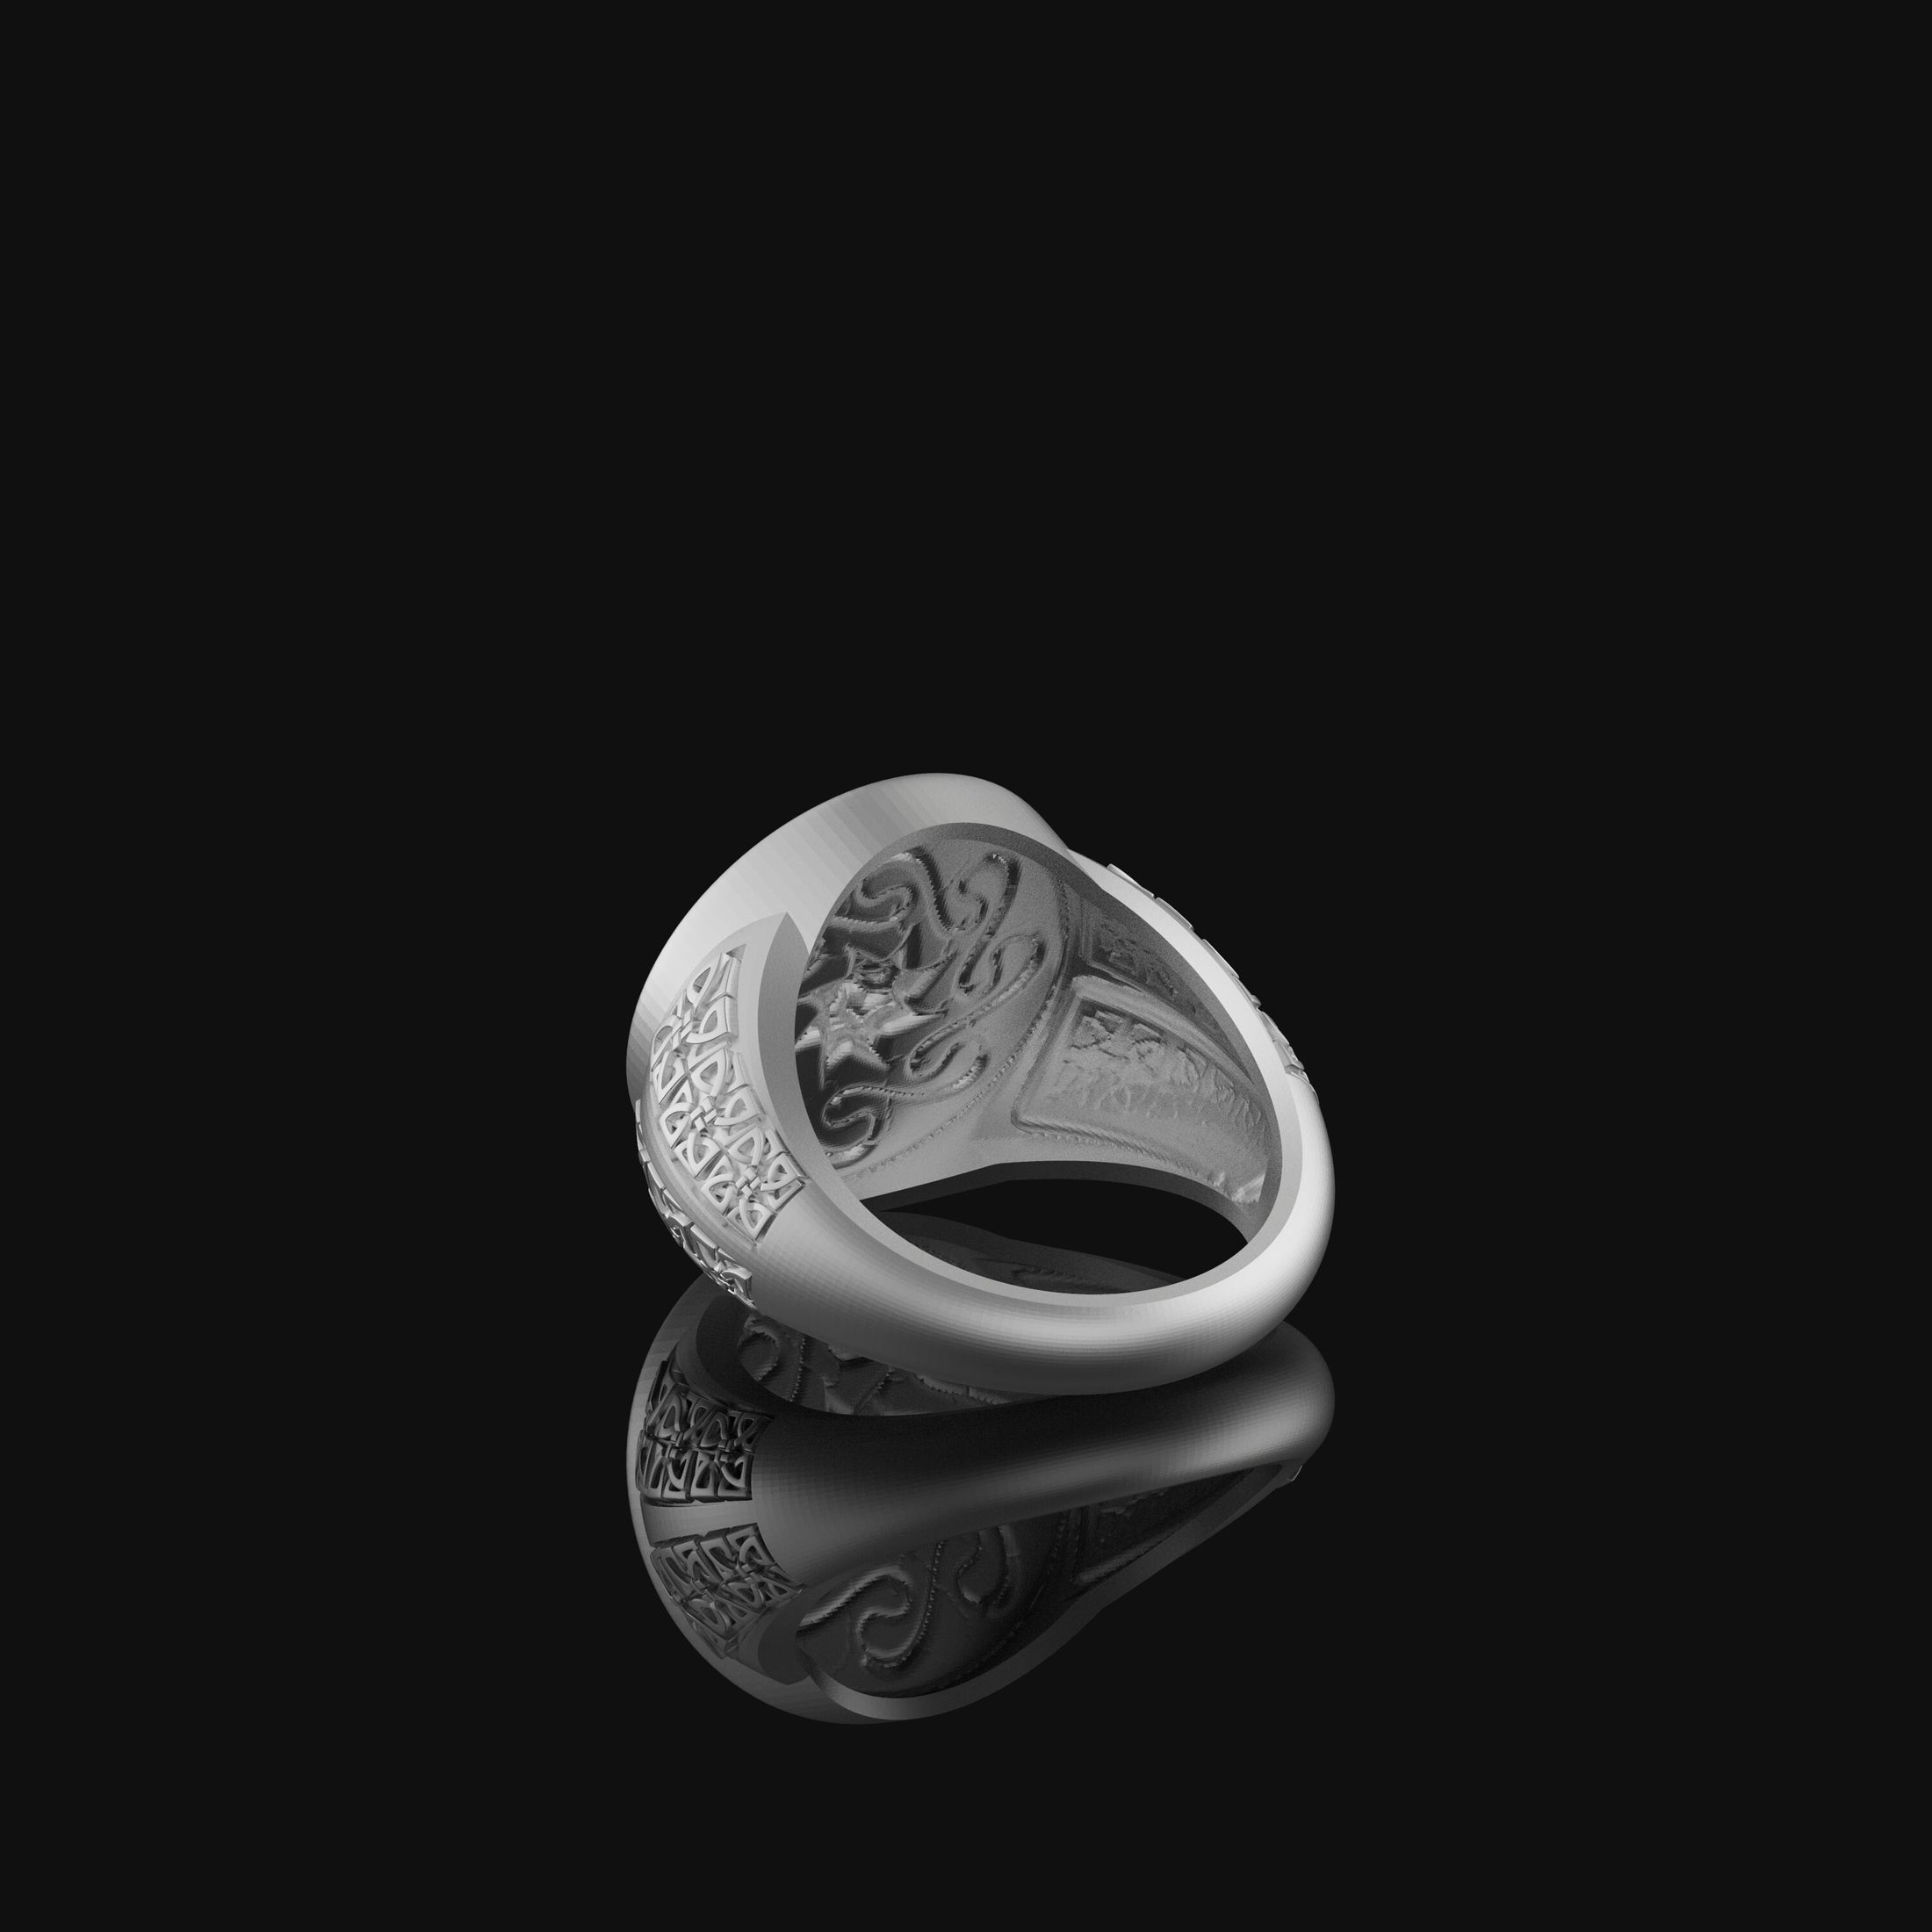 Celtic Motif Ring, Silver Celtic, Intricate Design, Historical Jewelry, Irish Heritage, Celtic Knot, Unique Gift, Traditional Celtic